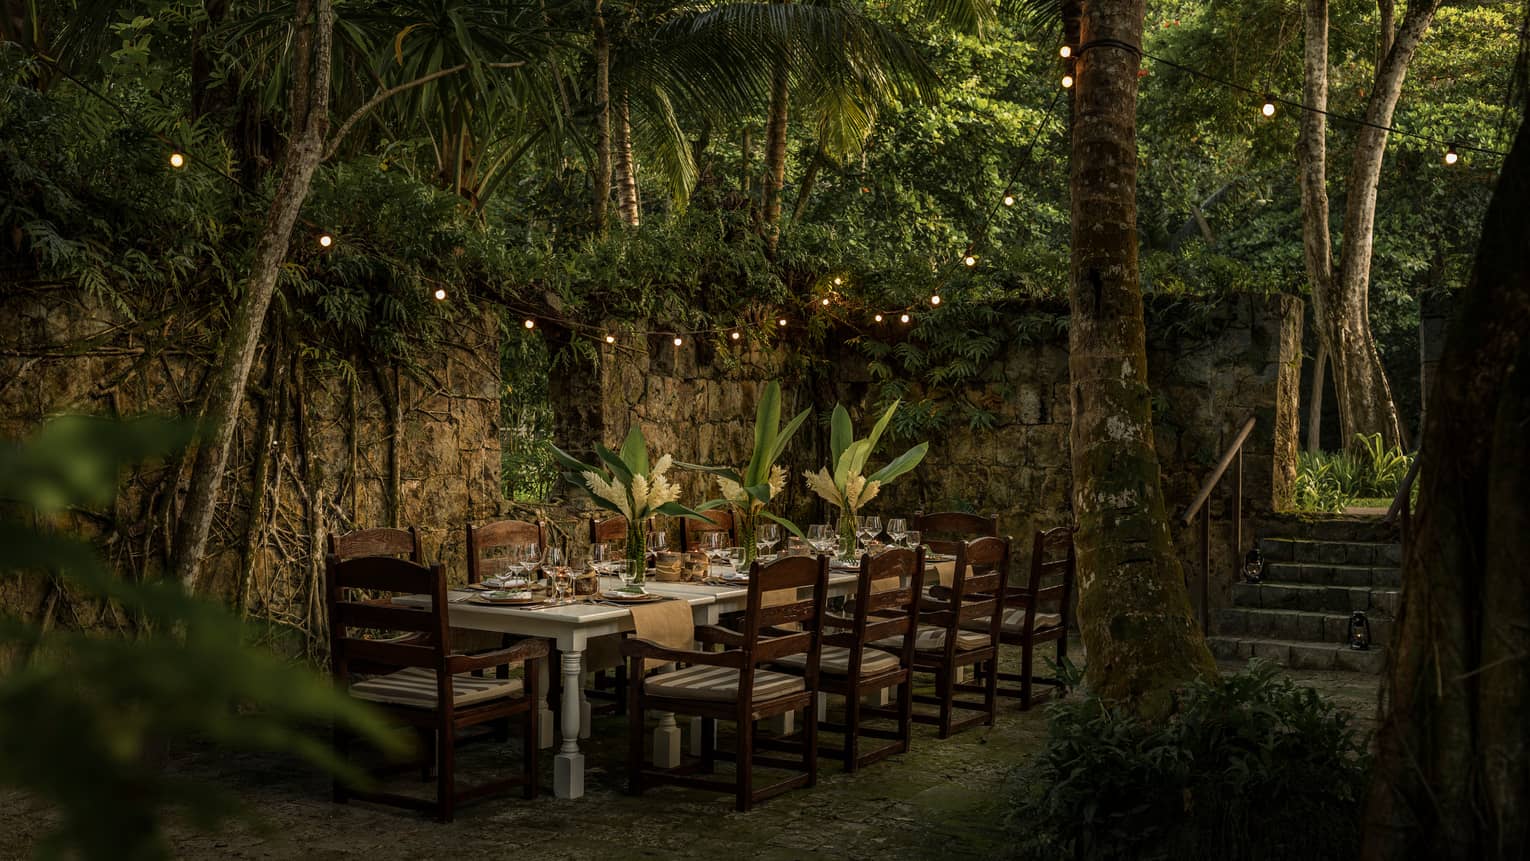 Wooden table with chairs outdoors surrounded by greenery and fairy lights at night